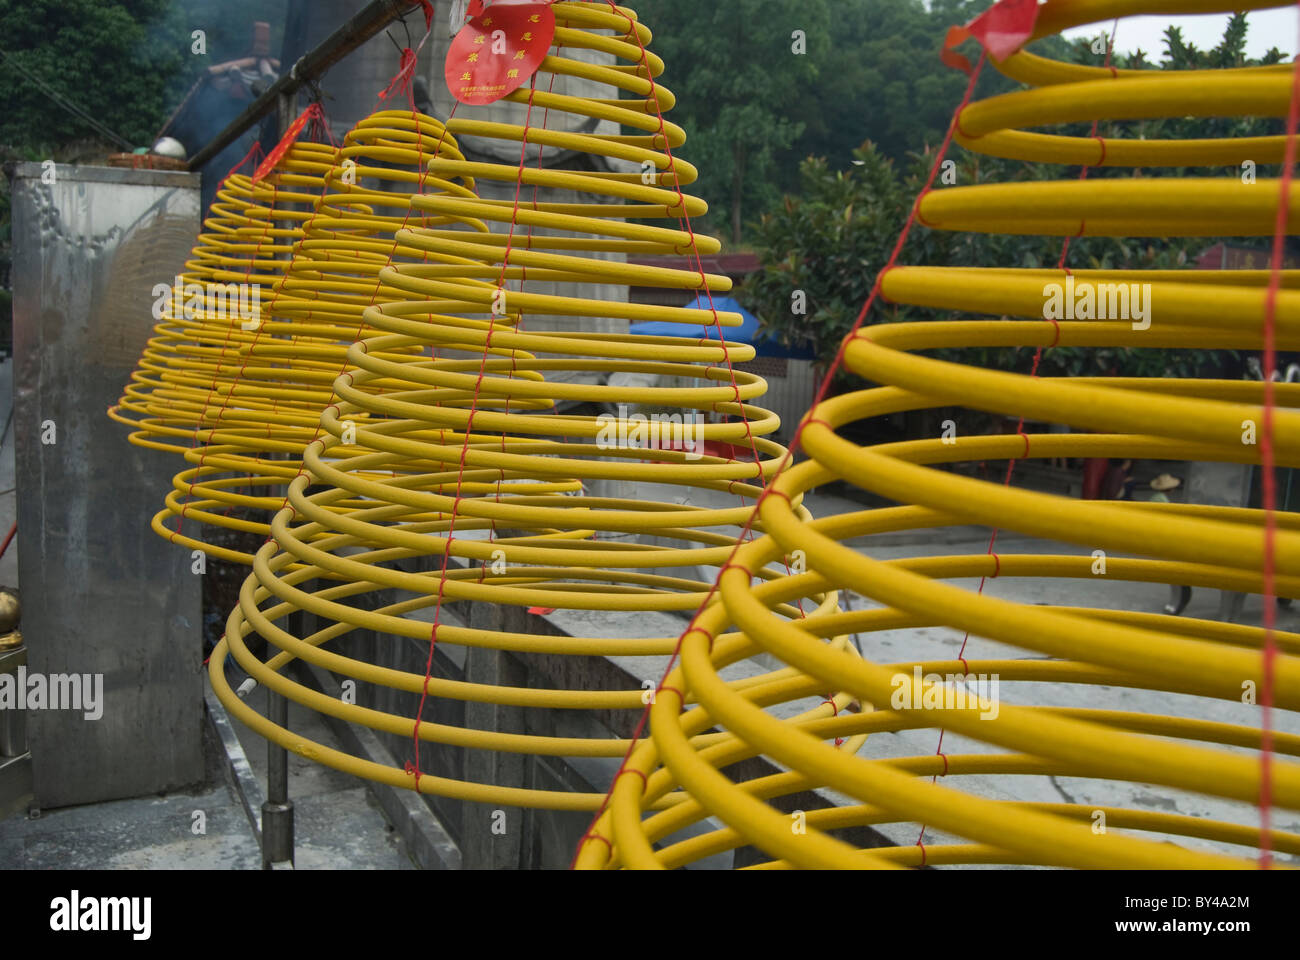 Spiral incenses used to worship Chines gods in a shrine, Shantou, China Stock Photo